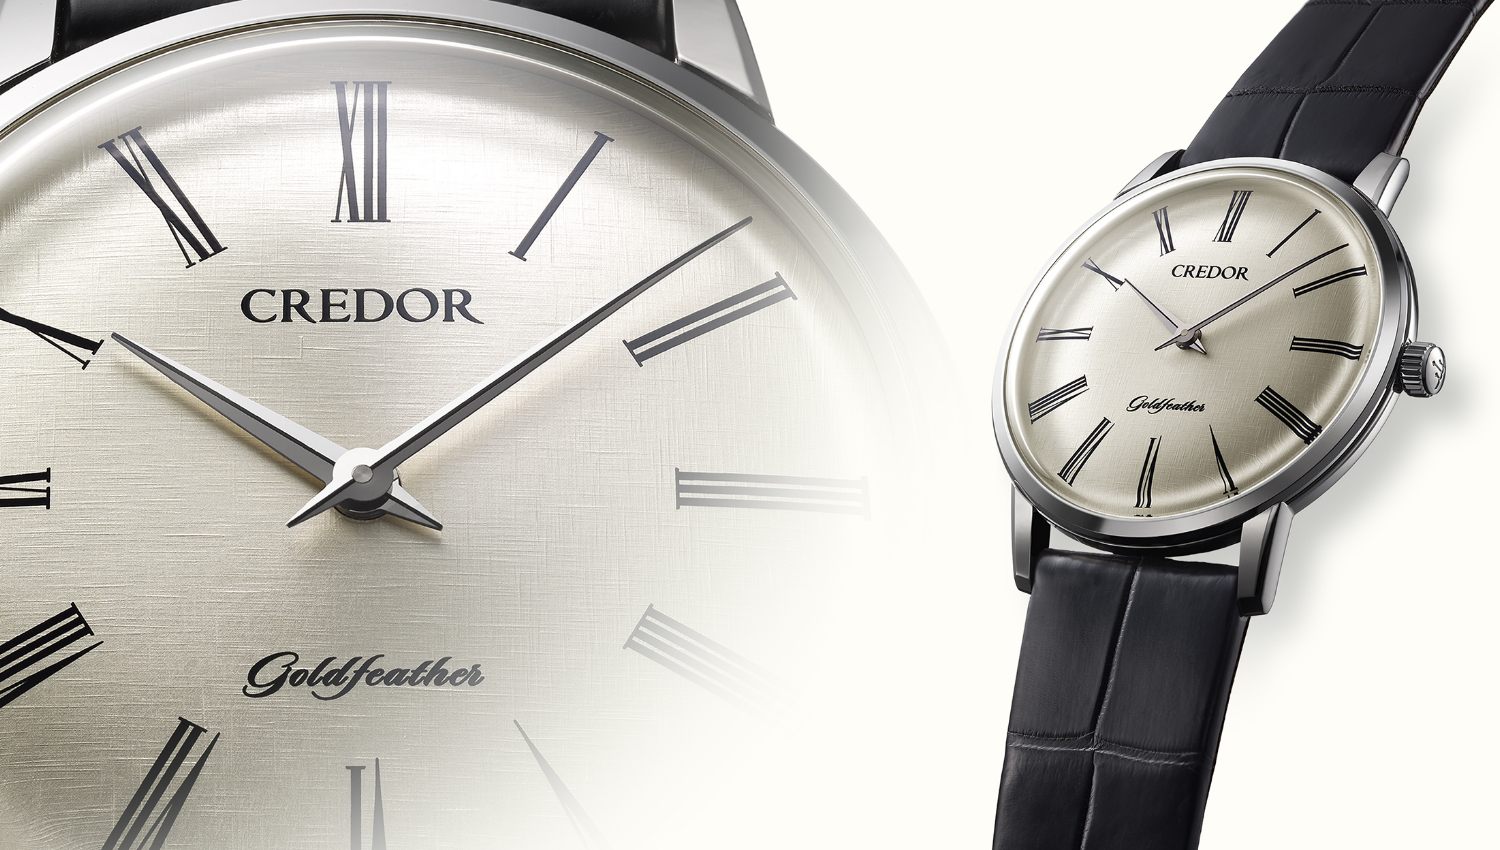 Credor Gold Feather 50th Anniversary Limited Edition